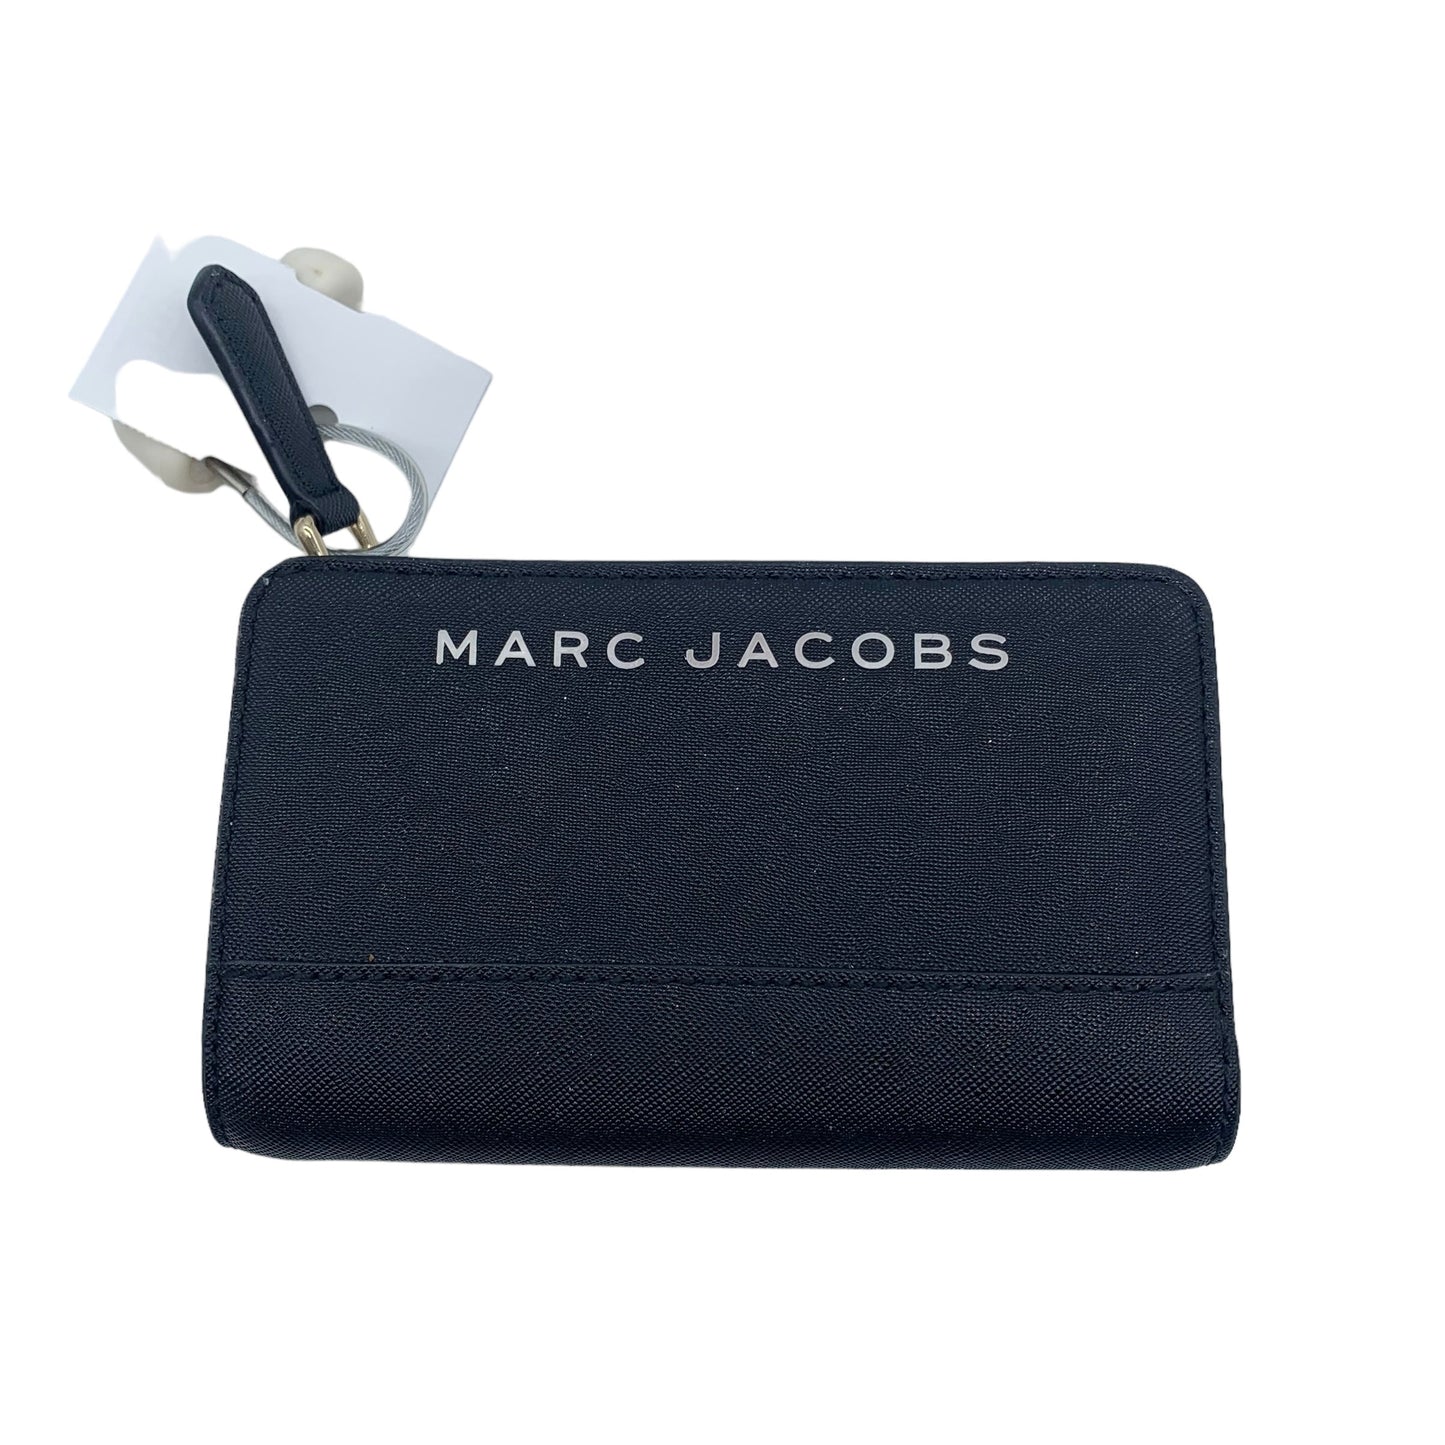 Wallet Designer Marc Jacobs, Size Small